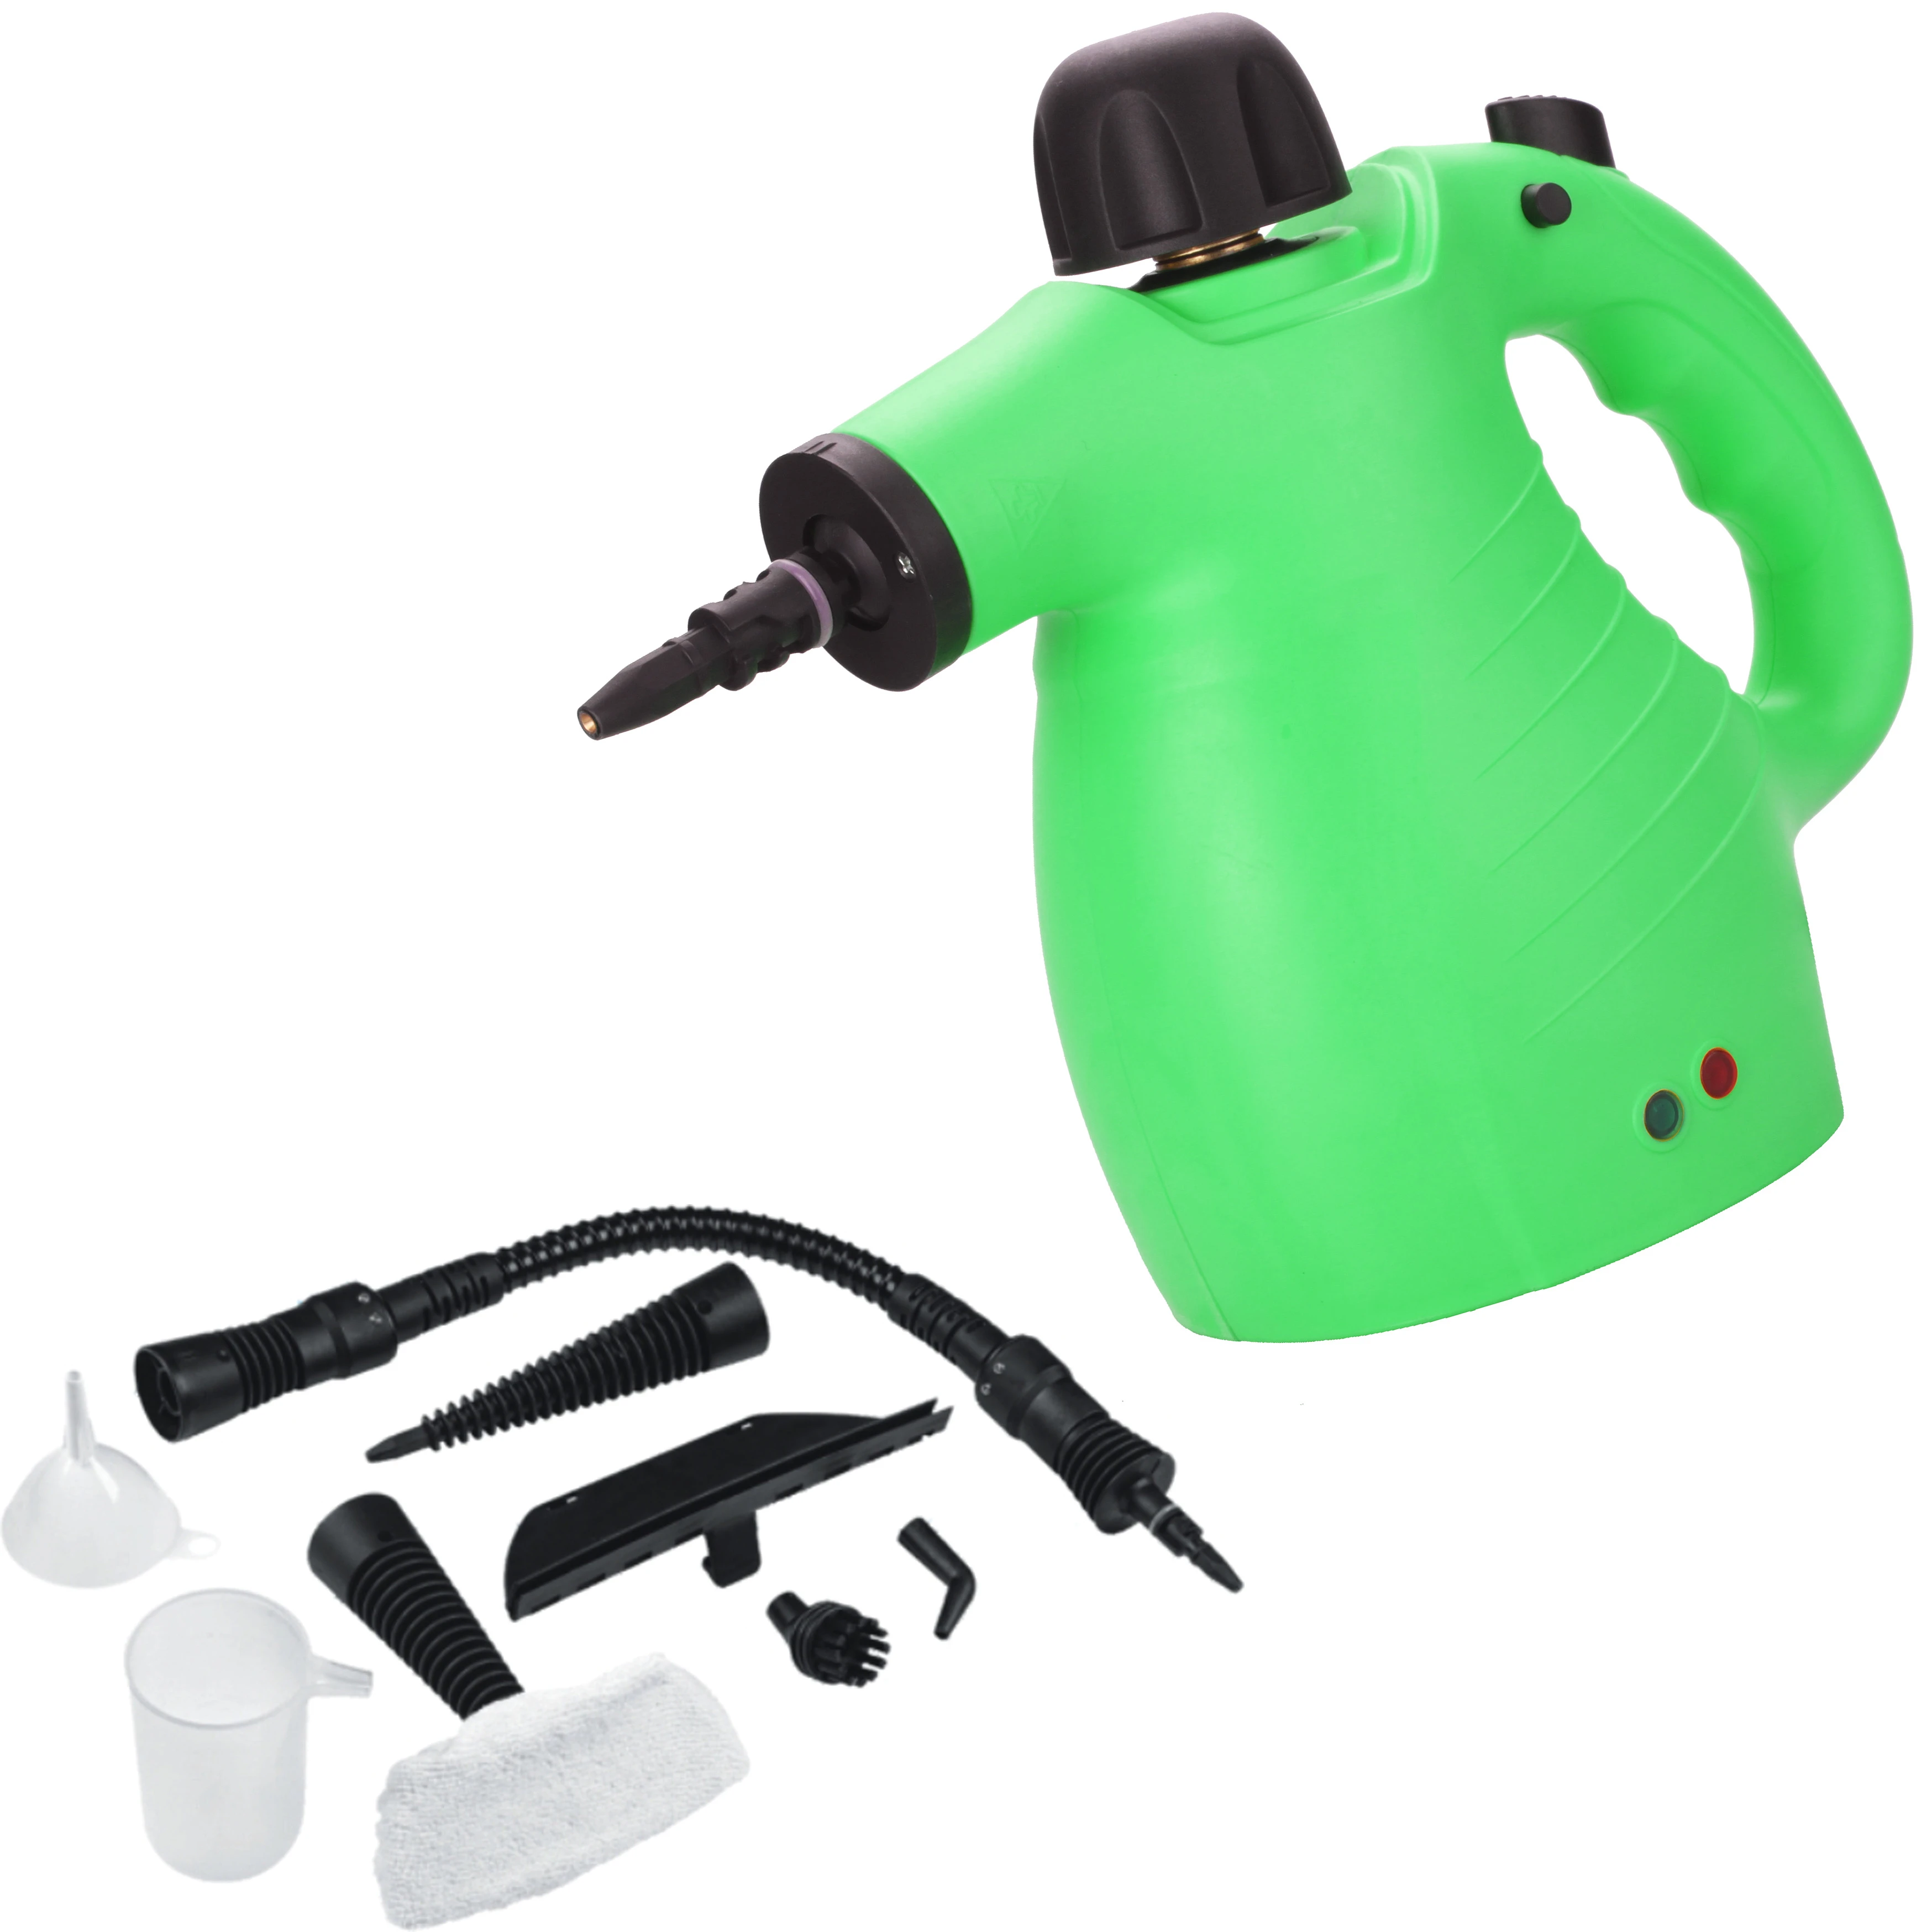 Jewelry Steam Cleaner With 9 Accessories for Multipurpose Using